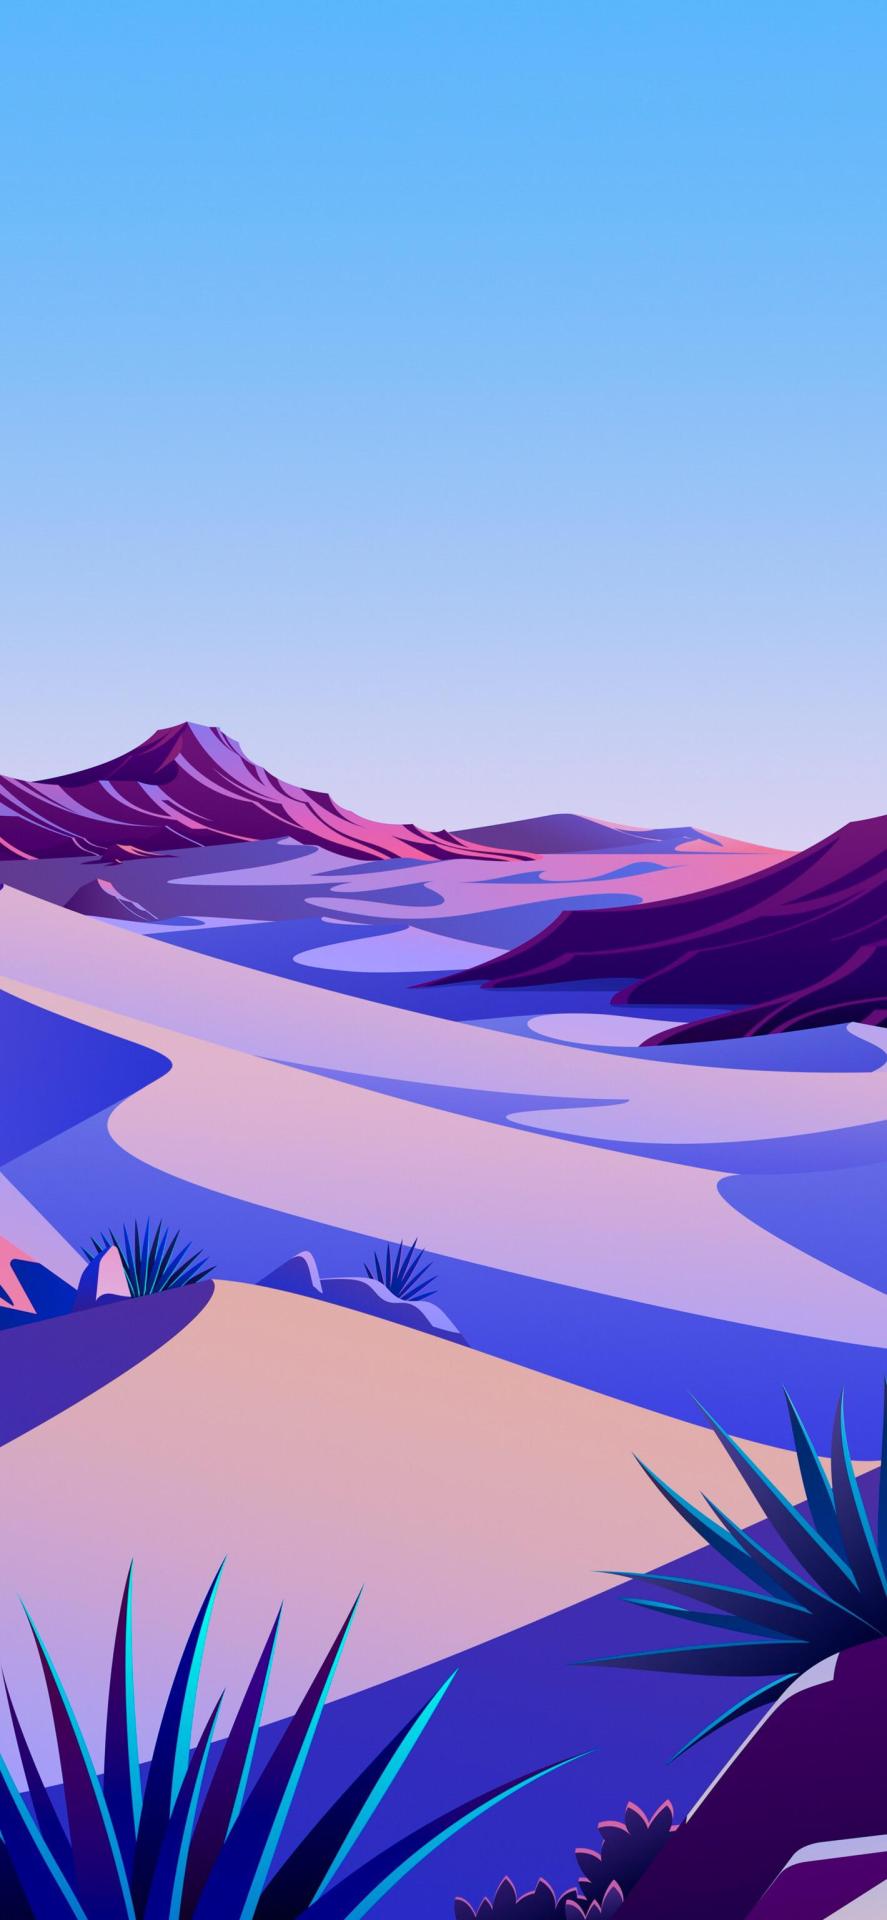 BACKGROUND - Stylized Desert 1 in 2D Assets - UE Marketplace